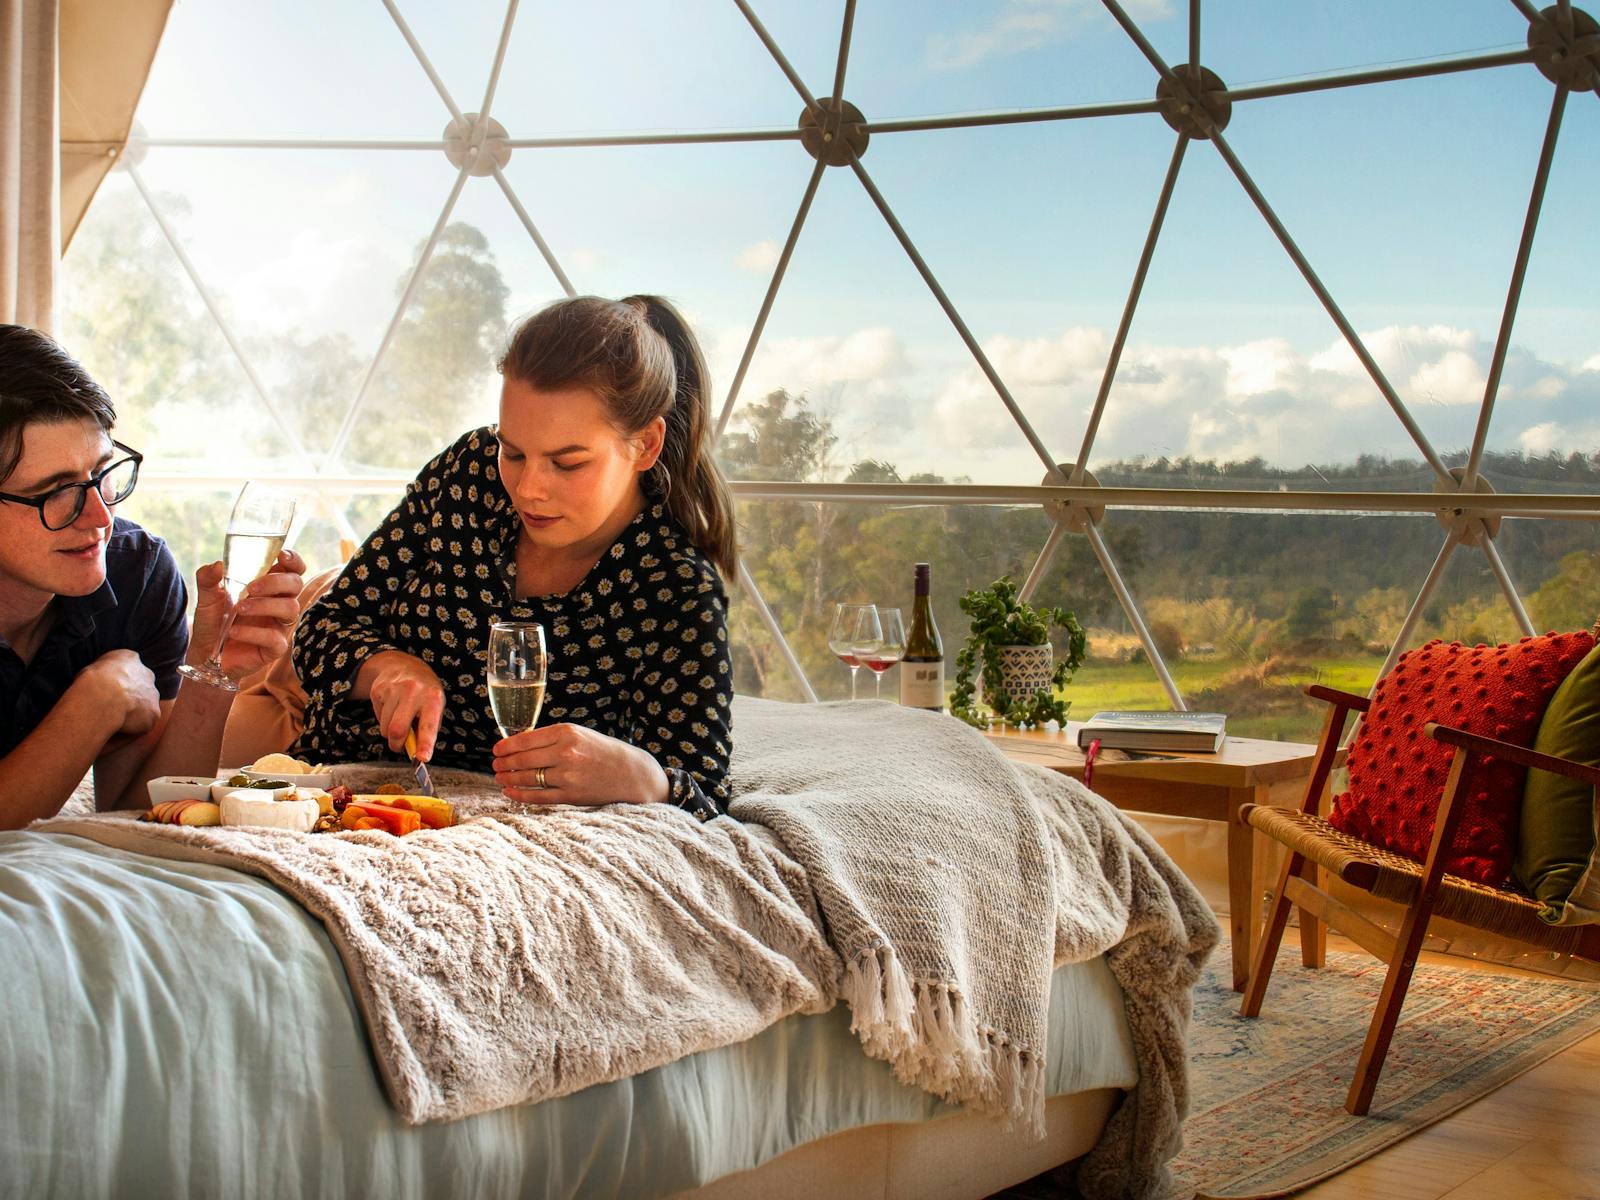 Wine tour, domescapes, glamping, dome, wine, cheese, homeymoon